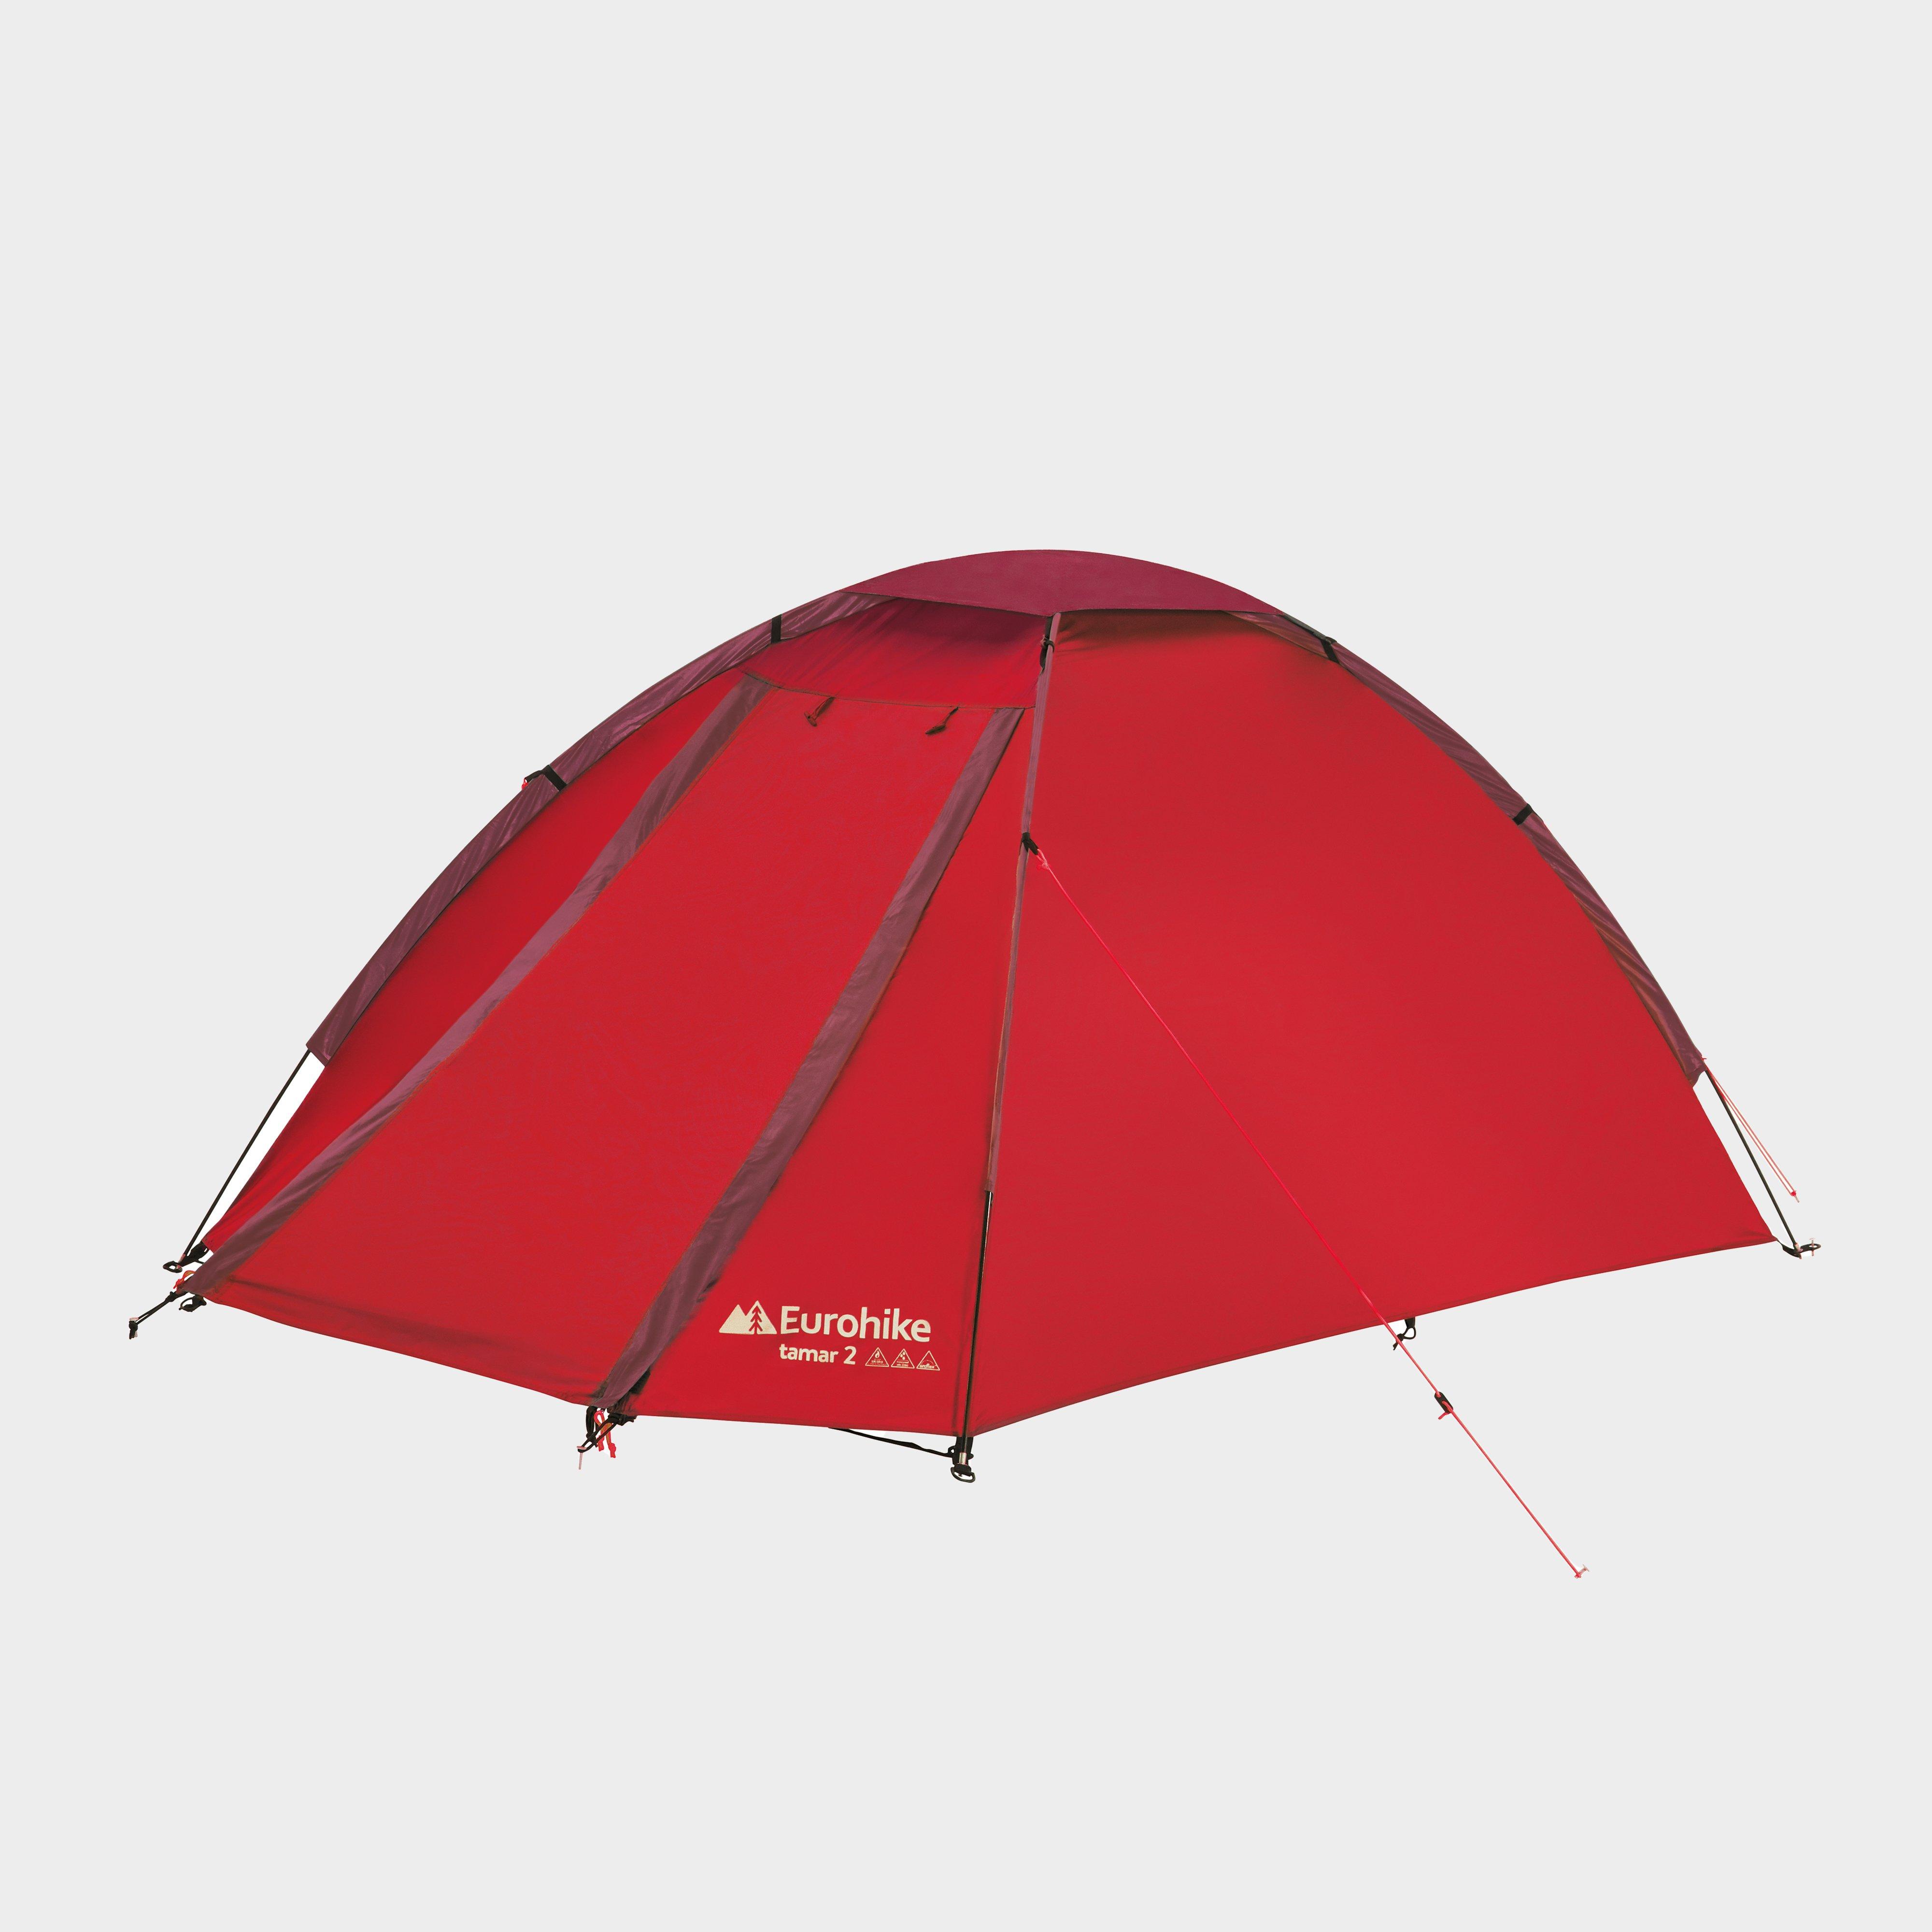 Eurohike Tamar 2 Tent - Red/red  Red/red